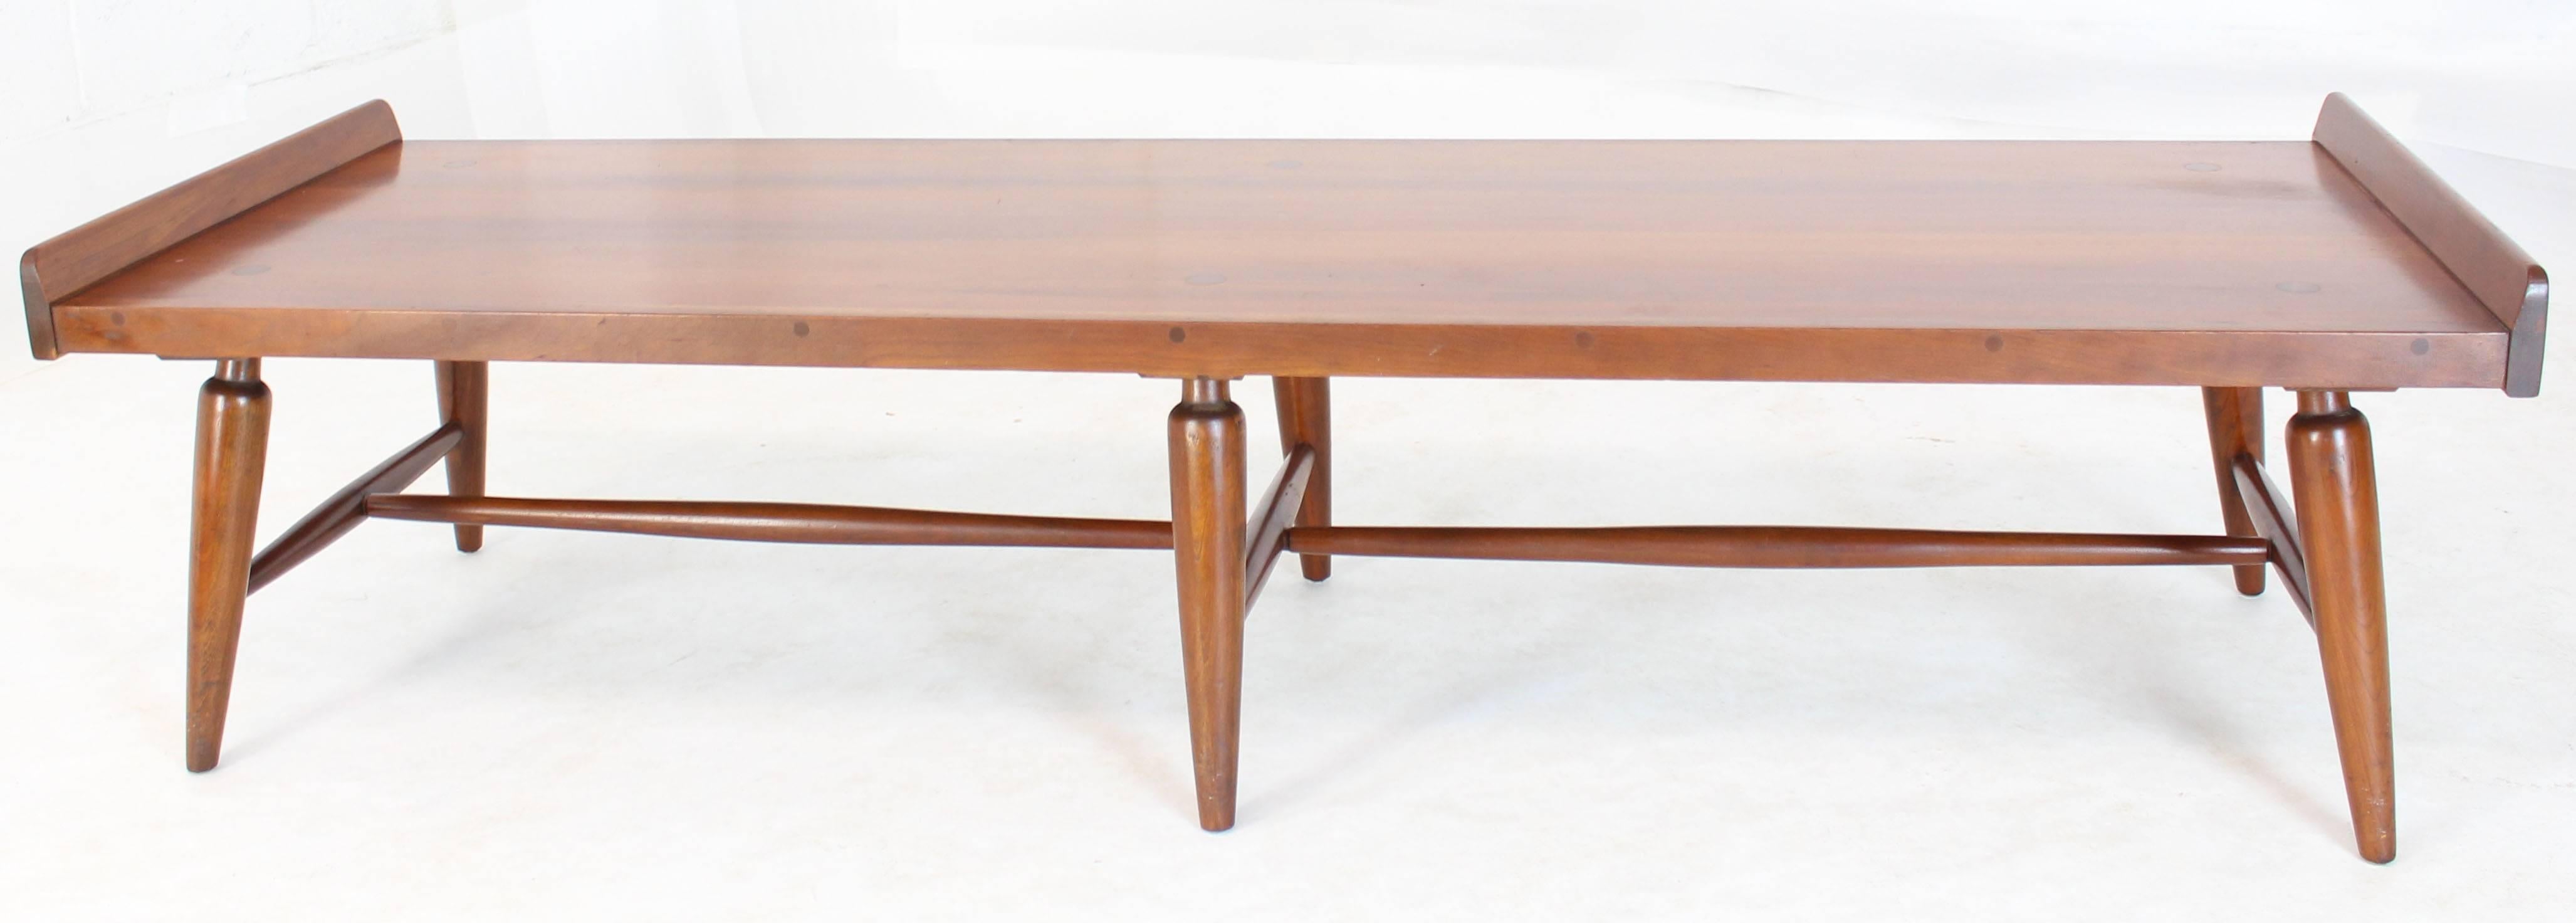 Solid Maple Six Legges Bench or Coffee Table with rolled edges 1